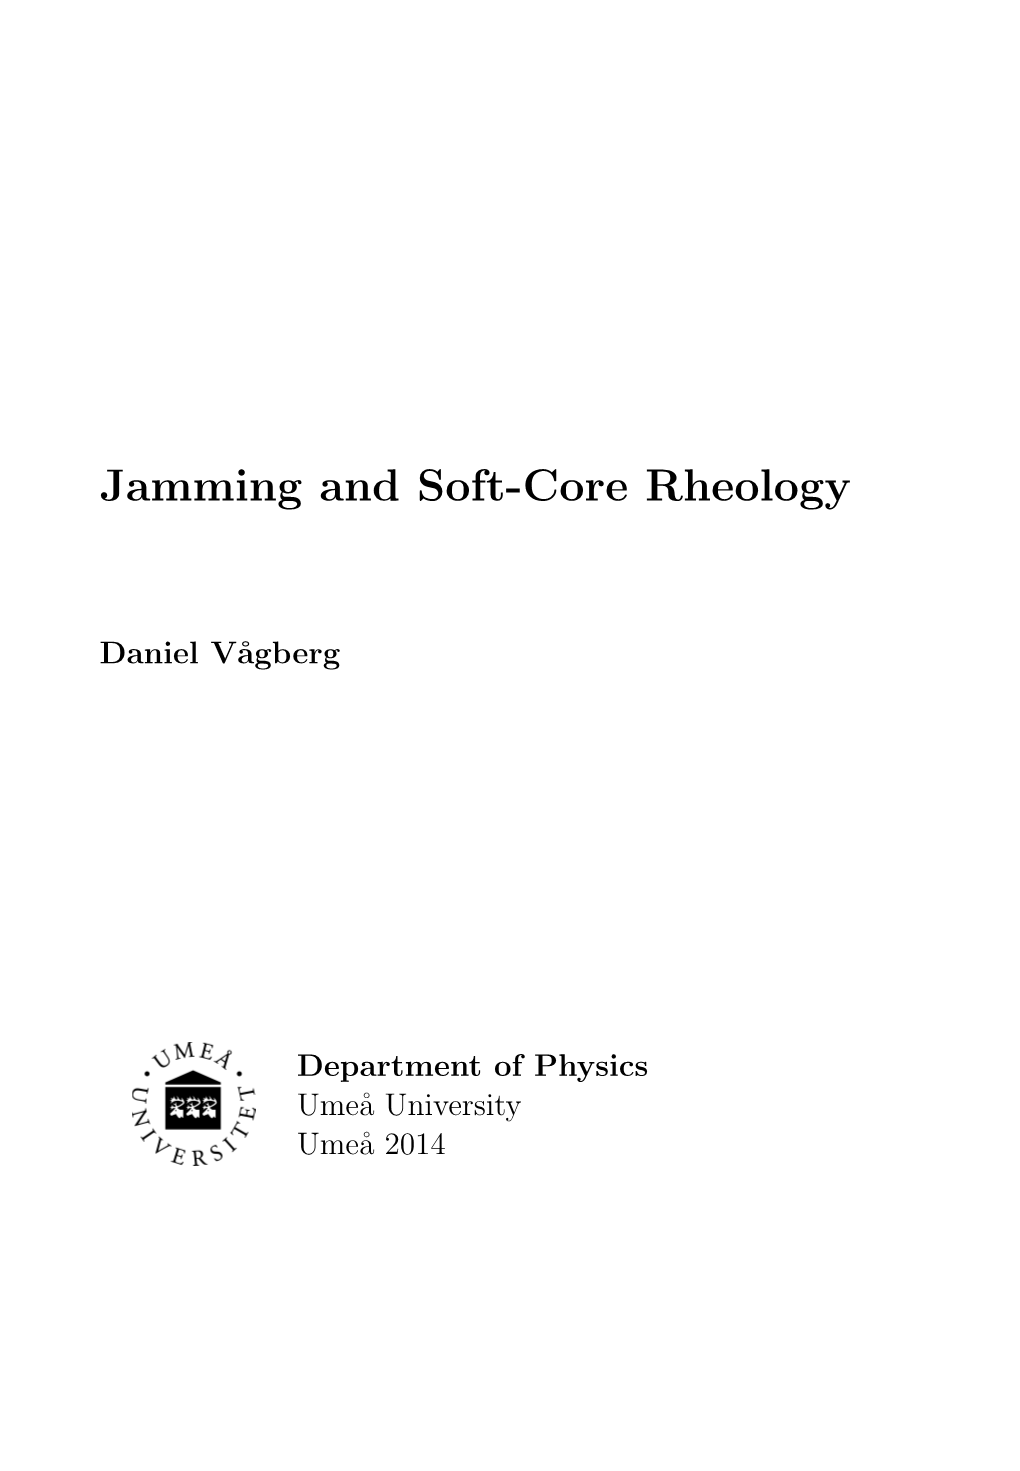 Jamming and Soft-Core Rheology